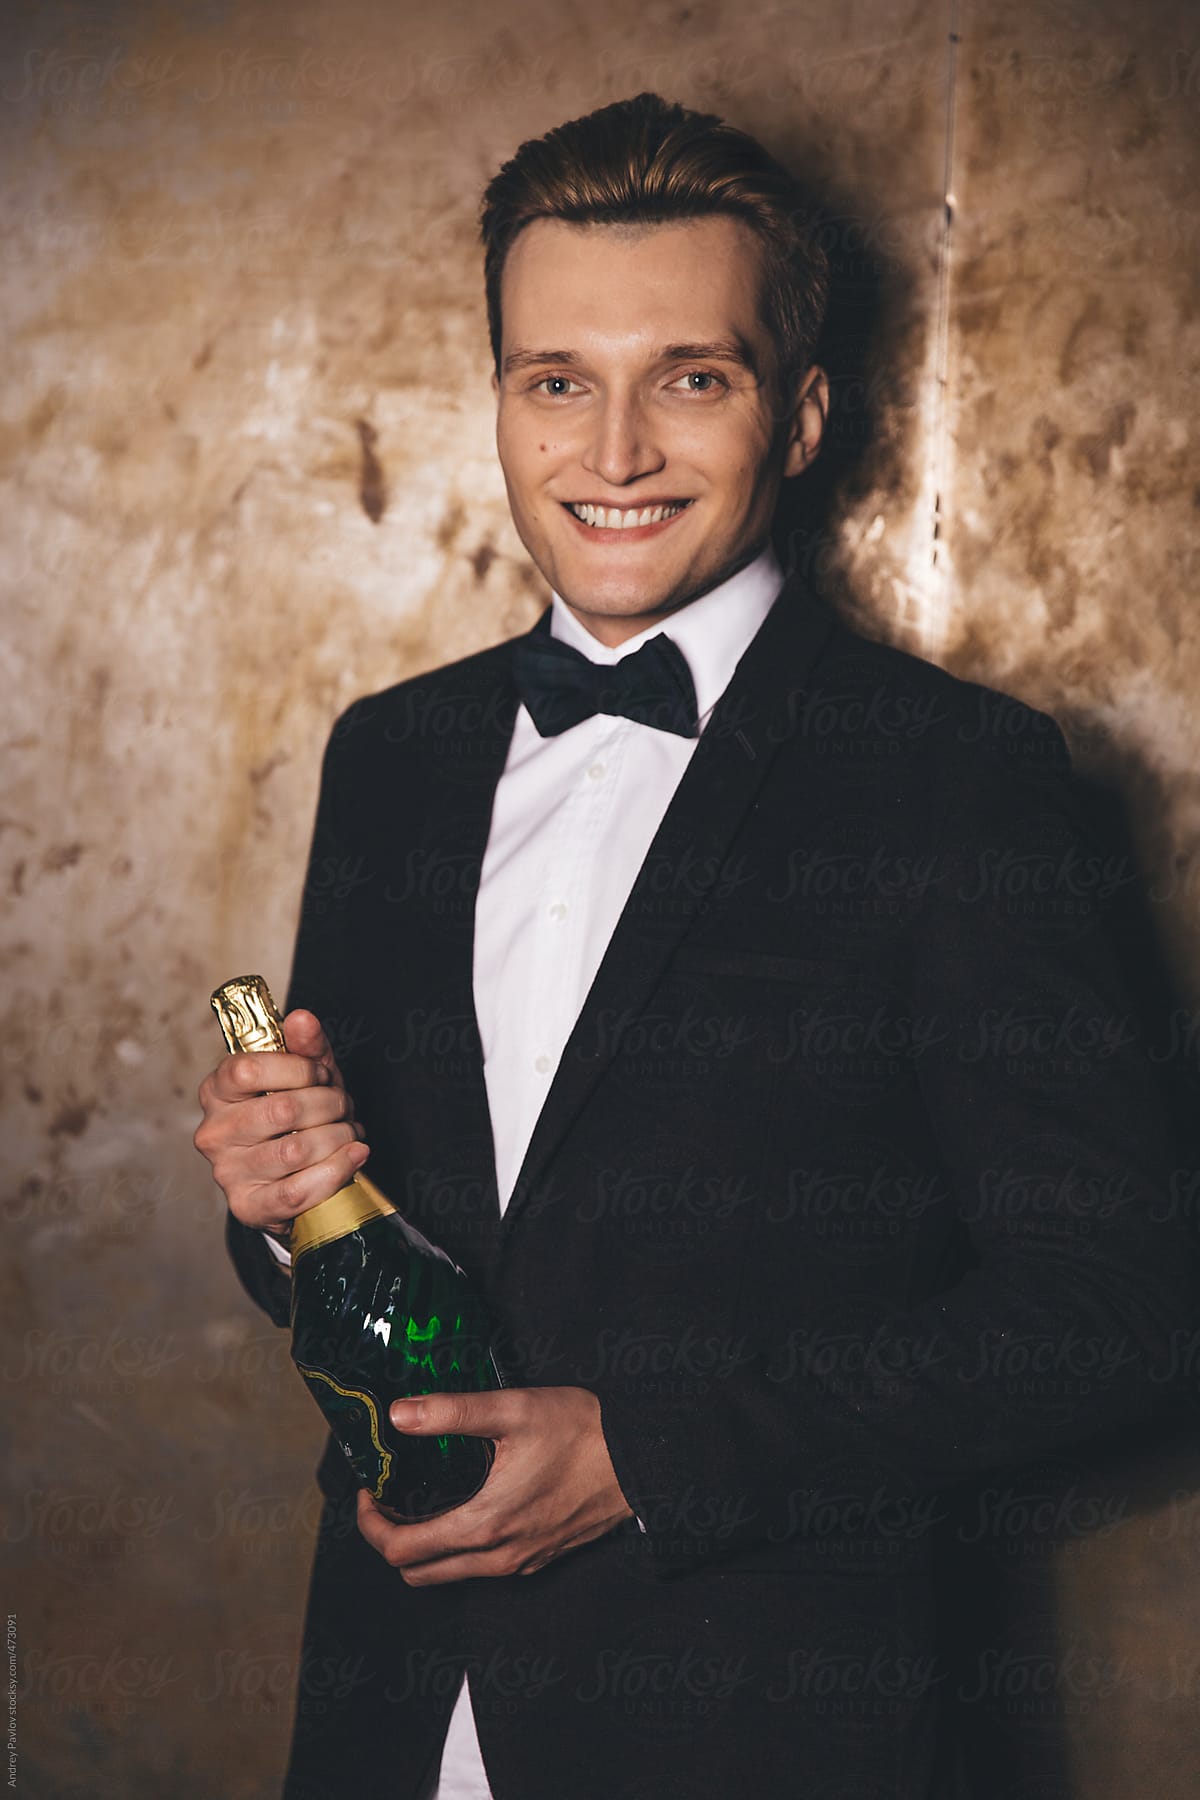 Handsome men dressed in a suit with bottle of champagne